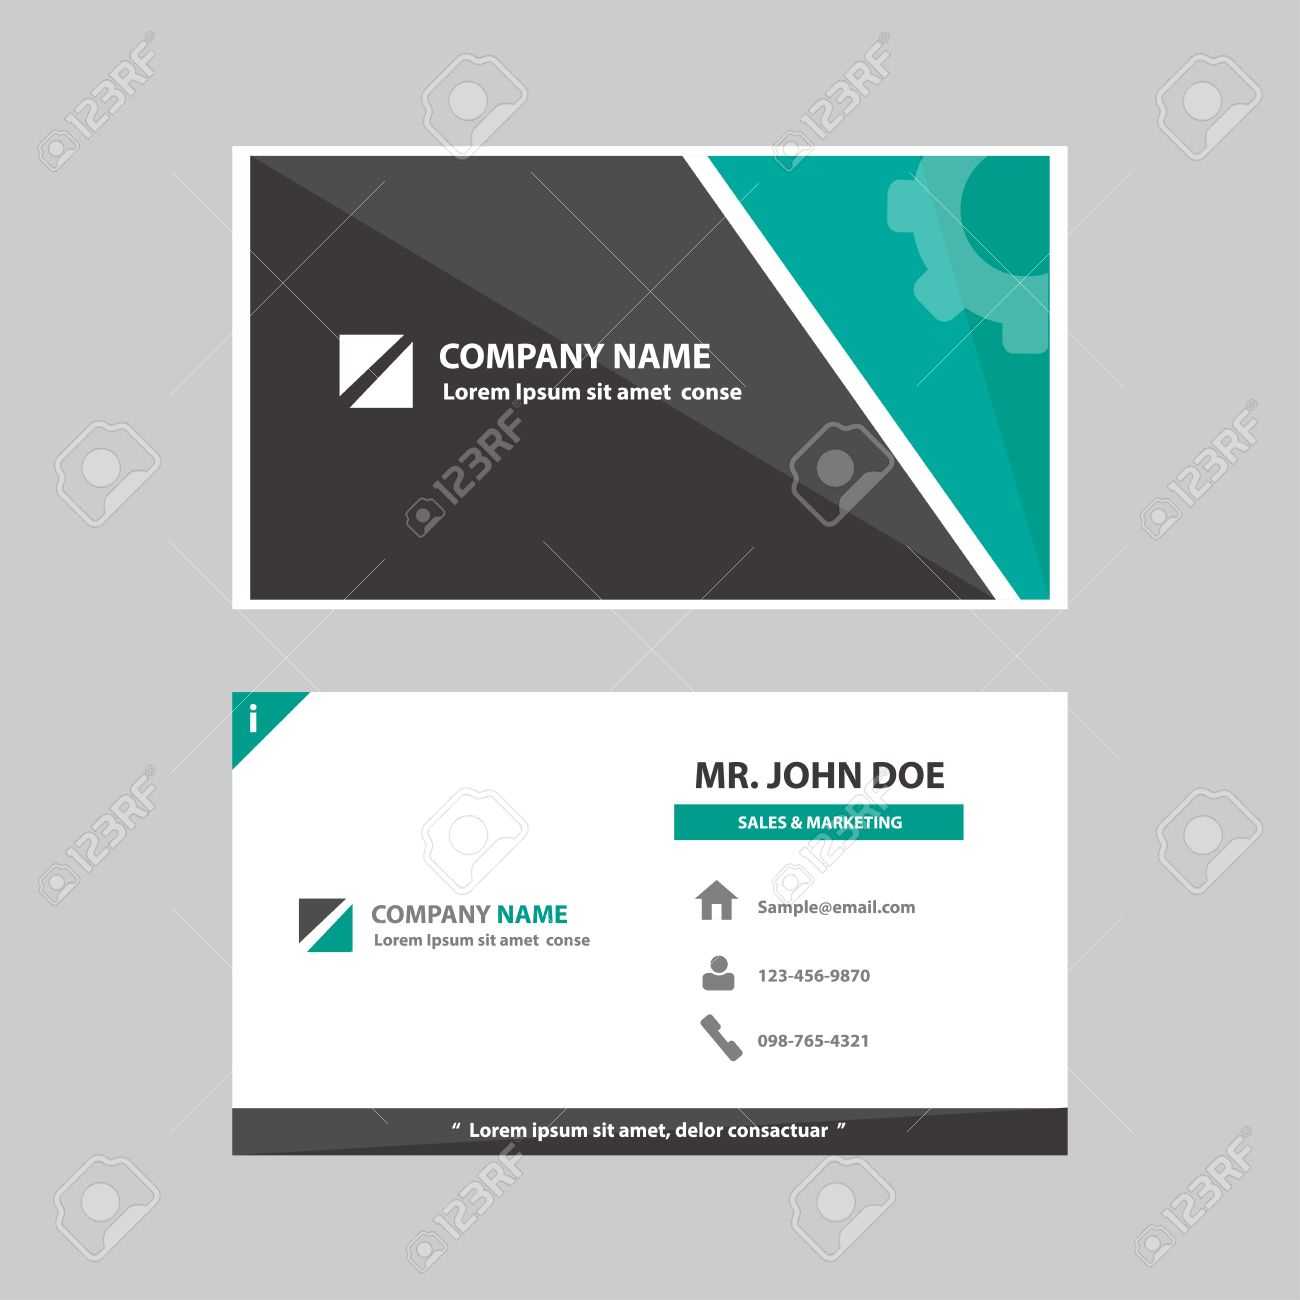 Green And Black Multipurpose Business Profile Card Template Flat Design For  Company Advertising Introduce Marketing Recruitment Within Advertising Card Template